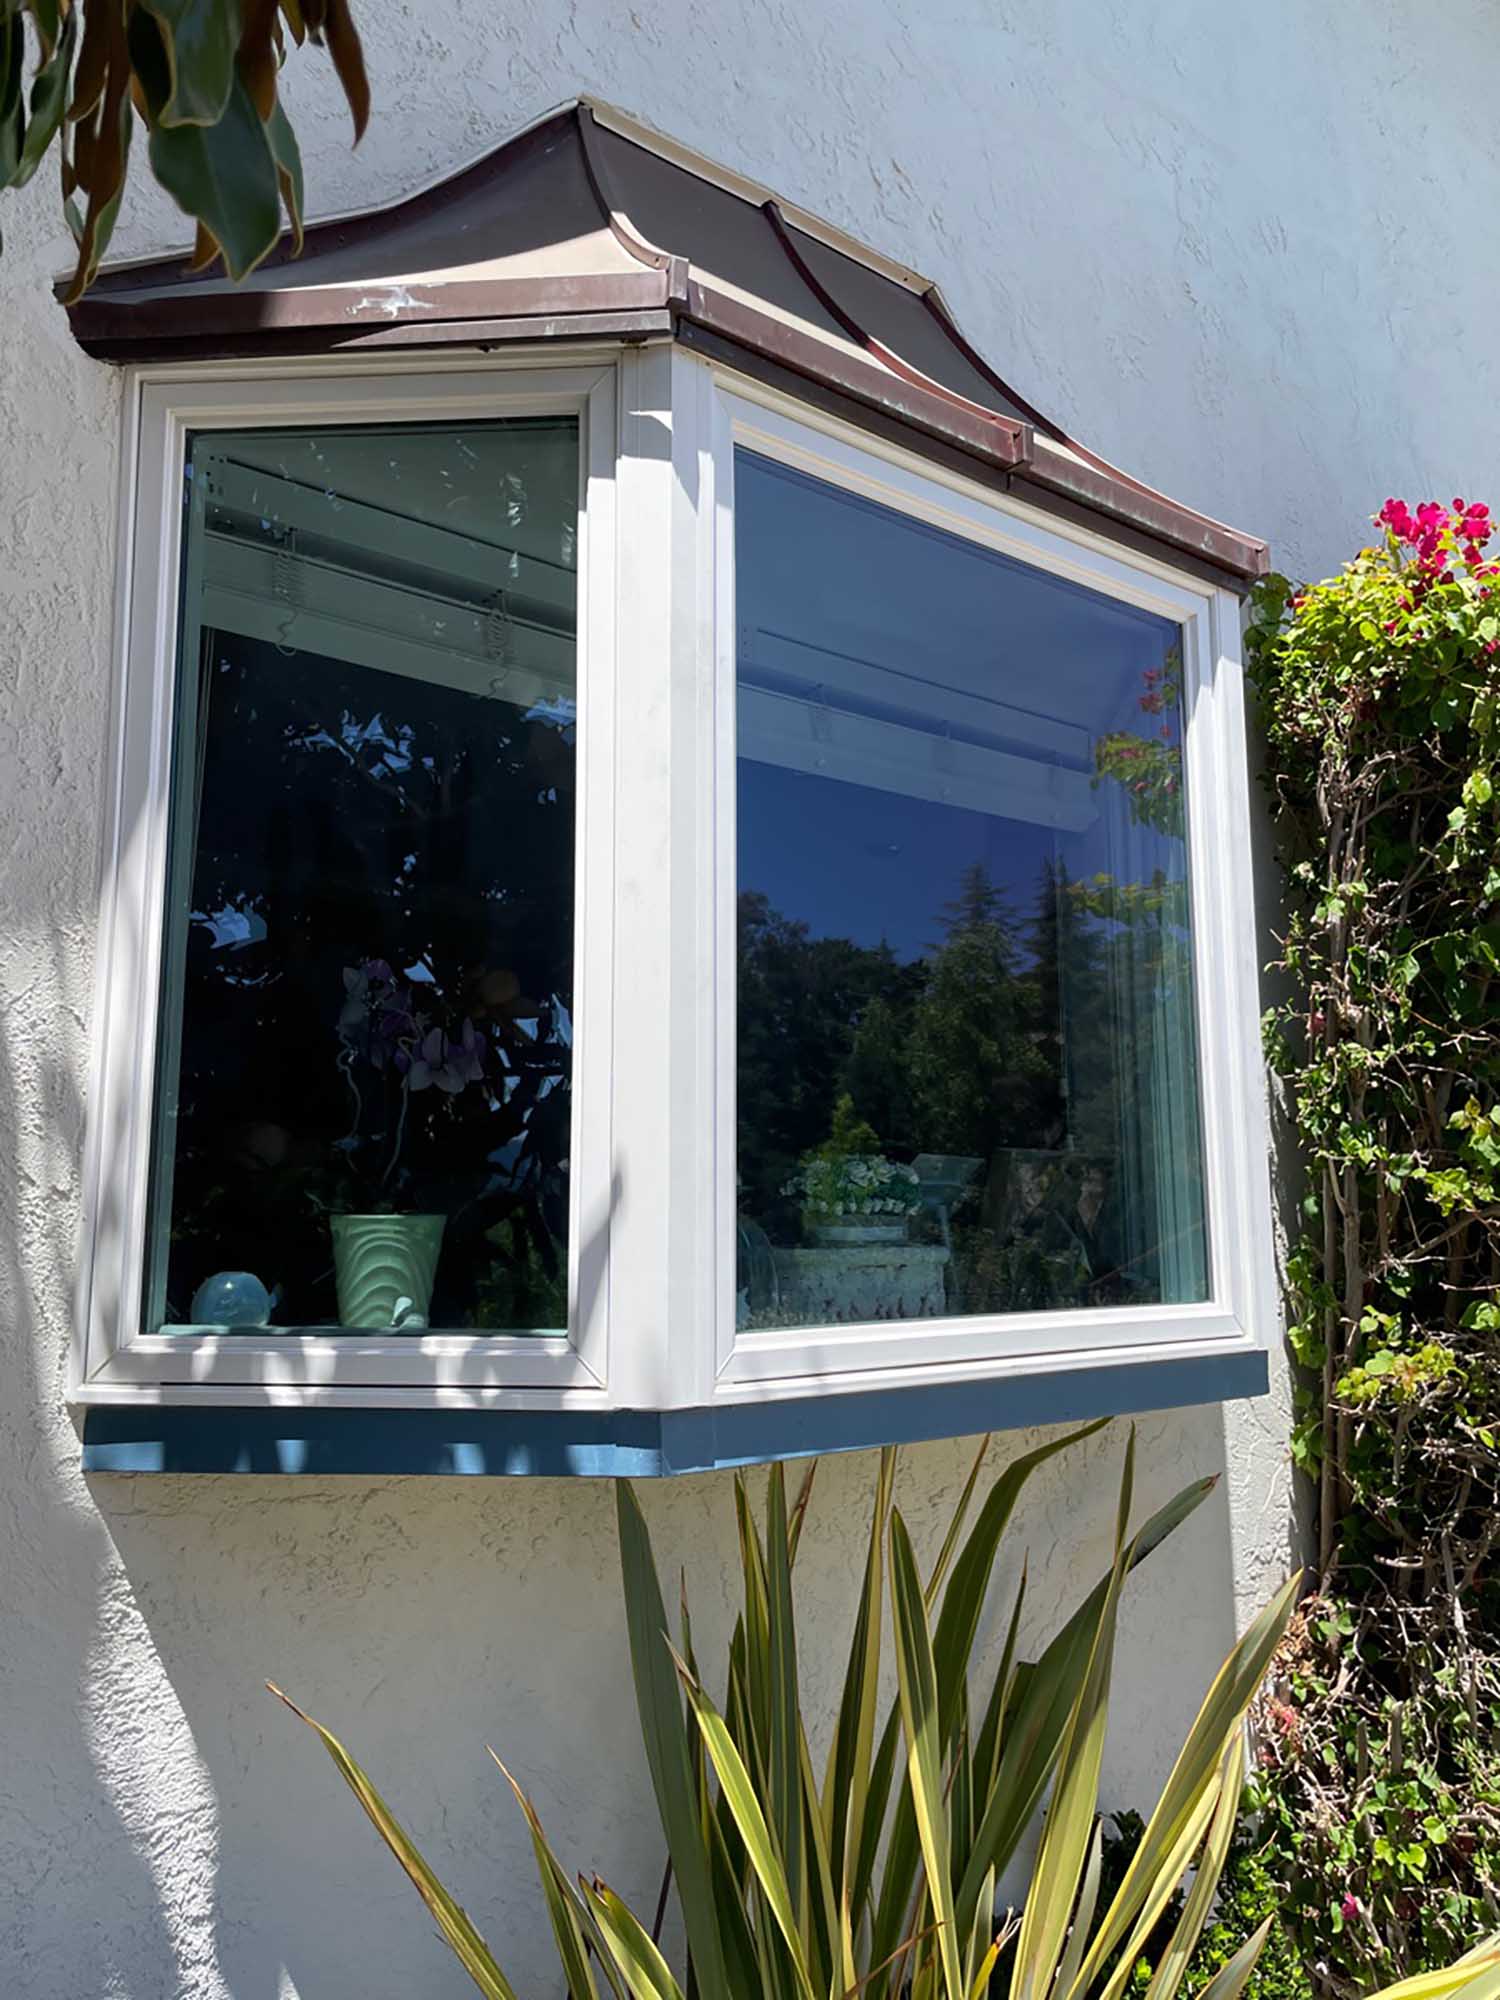 3M Prestige Exterior Window Film Installed On The Outside: Alamo, CA. Installed by ClimatePro.